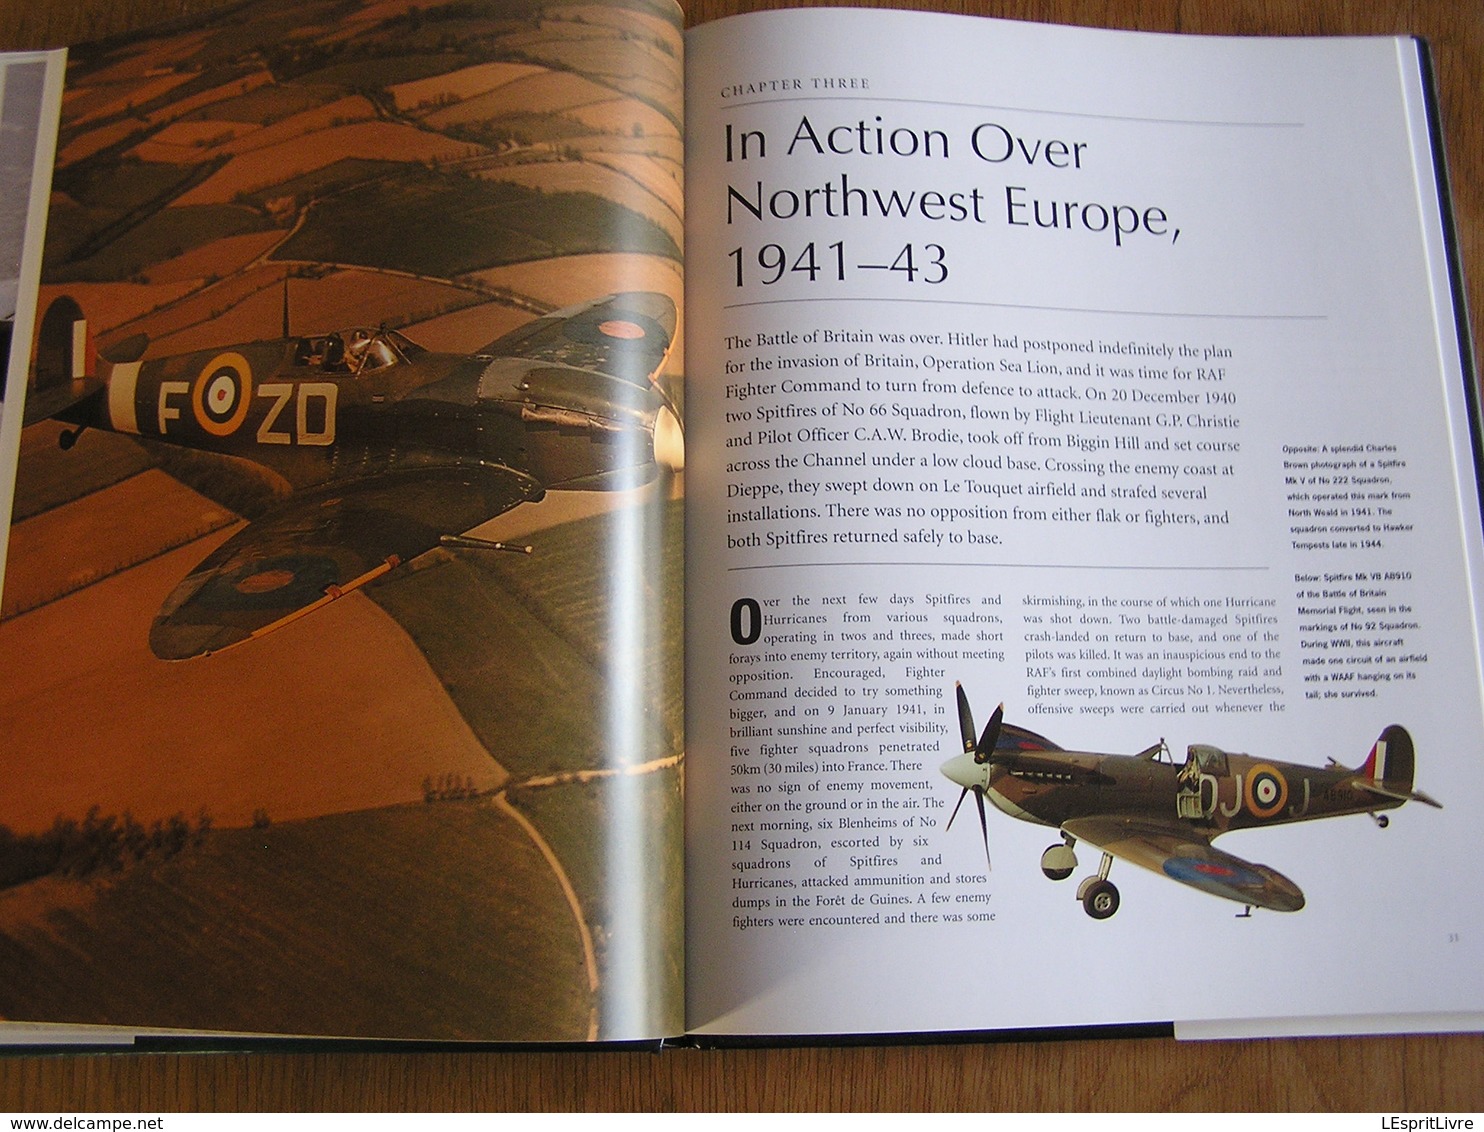 HISTORY OF THE SPITFIRE Royal Air Force RAF Battle of Britain Aviation Avion Aircraft Angleterre Guerre 40 45 World War